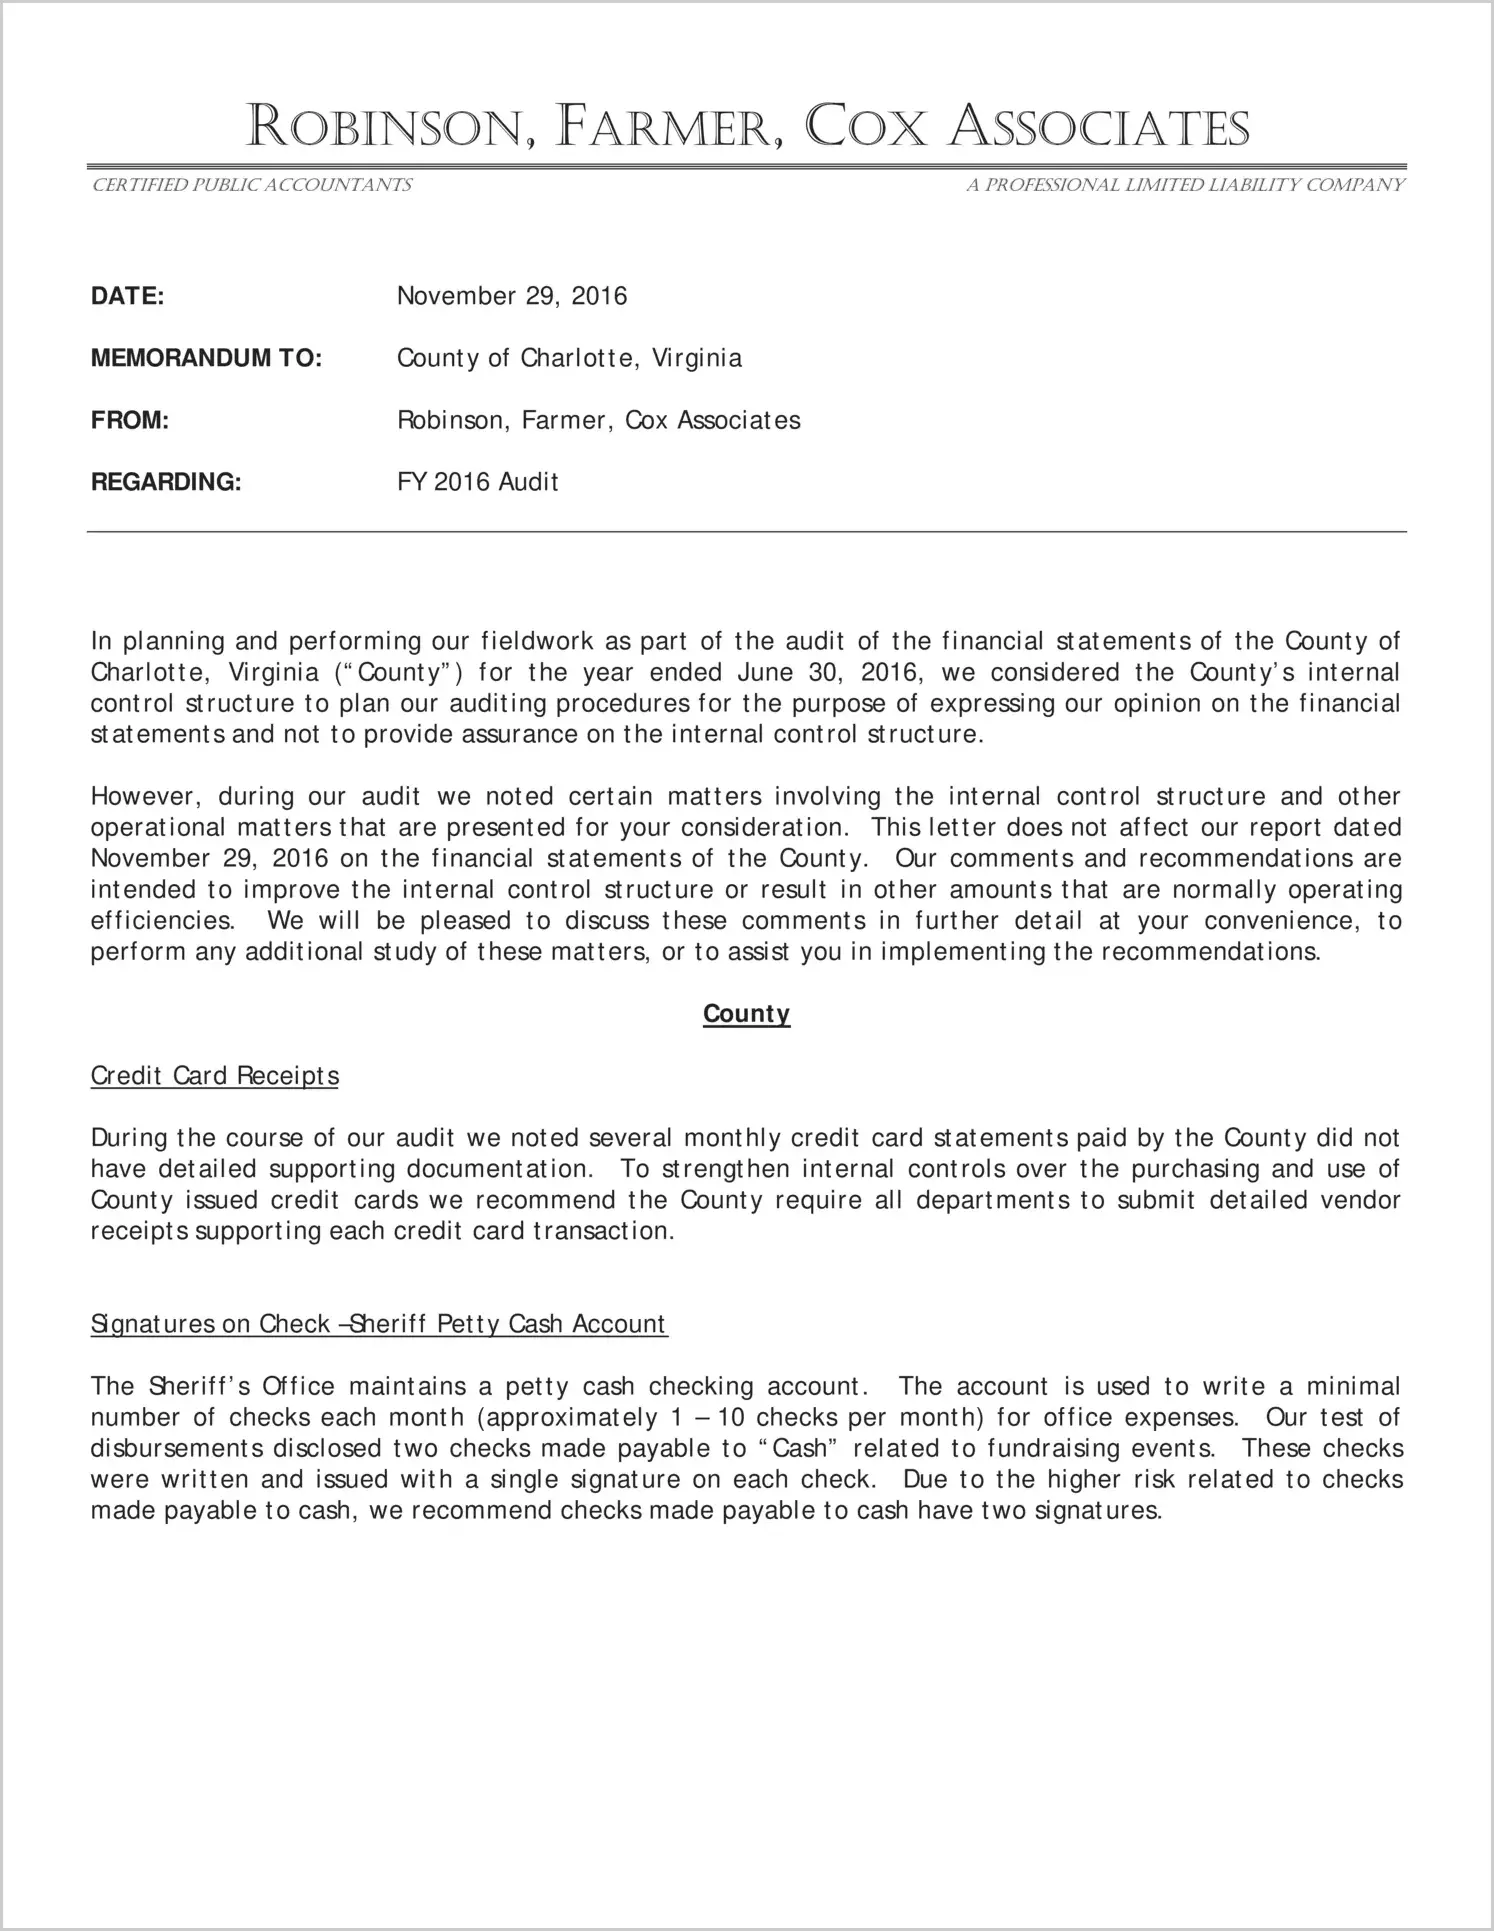 2016 Management Letter for County of Charlotte